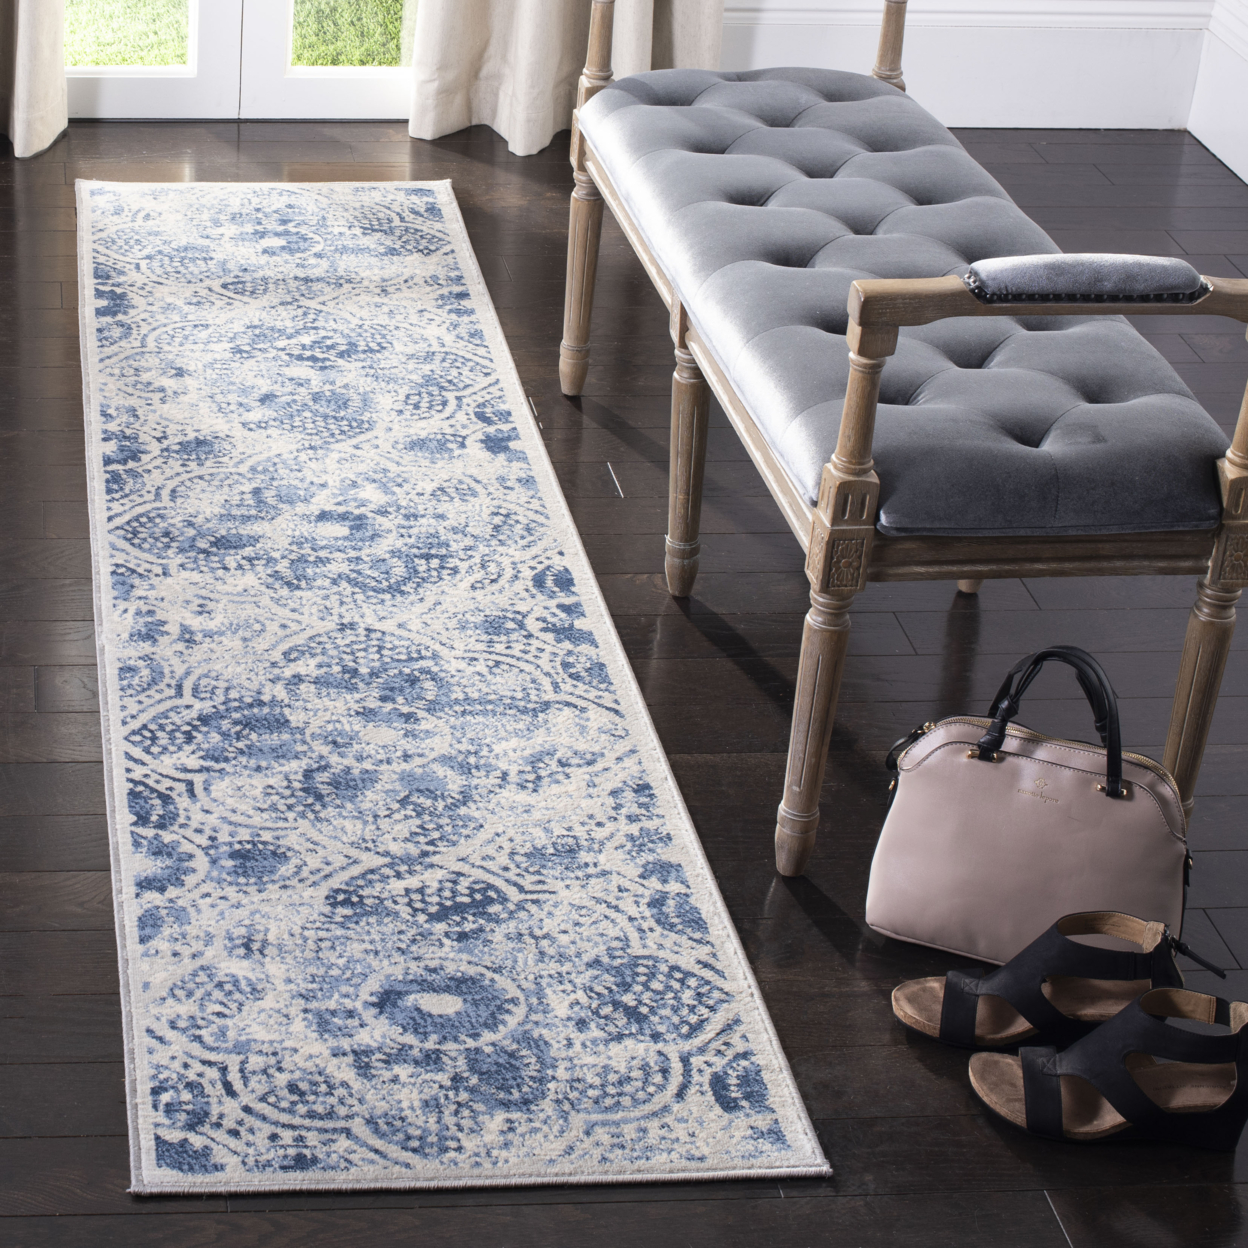 SAFAVIEH Brentwood Collection BNT862D Cream / Blue Rug - 8 X 10